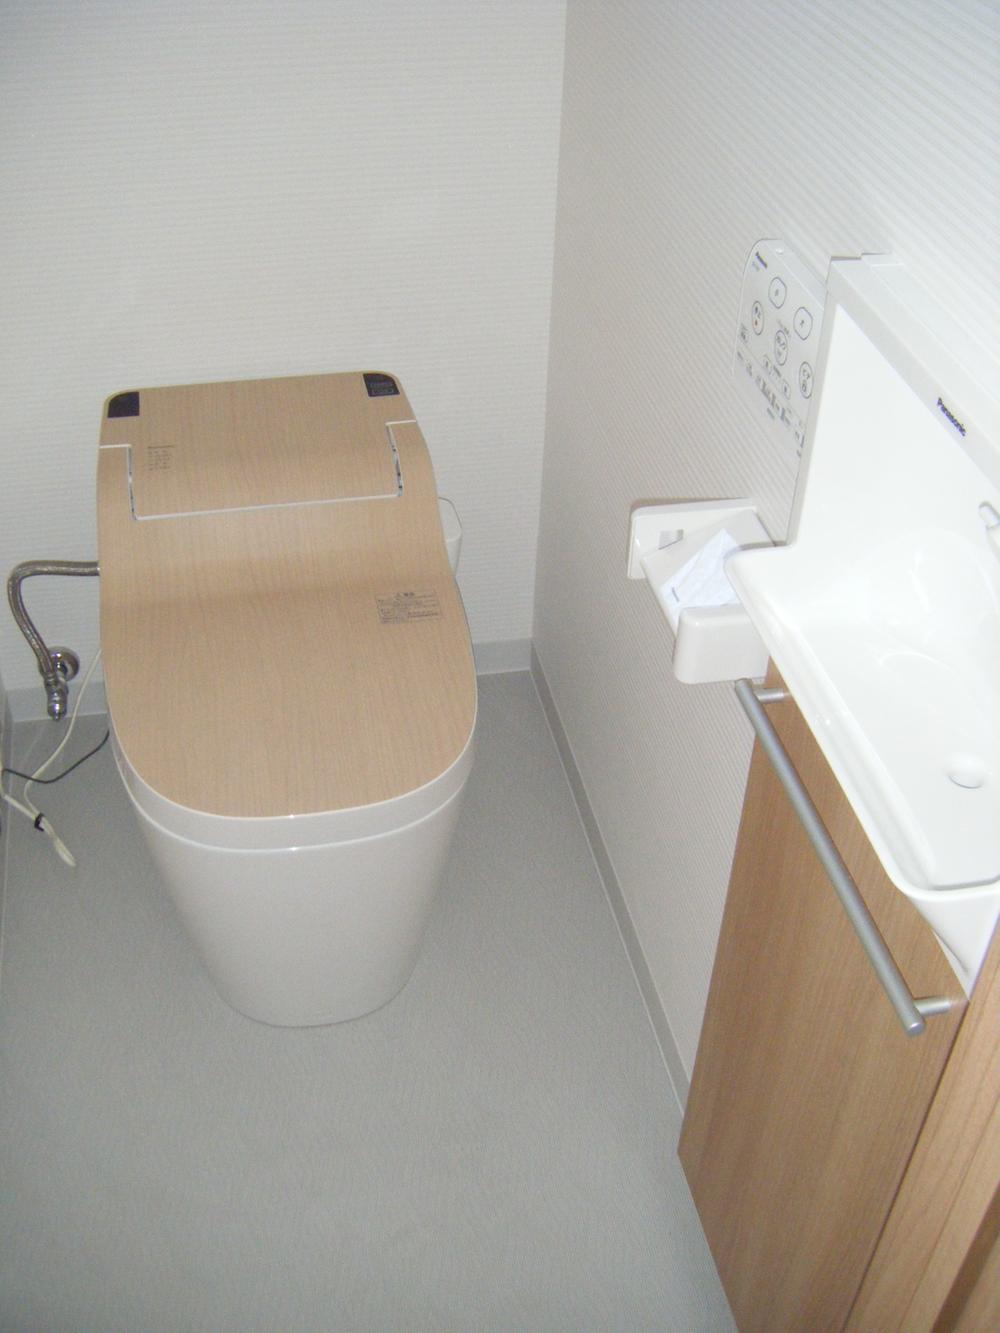 Building plan example (introspection photo). Same specifications toilet